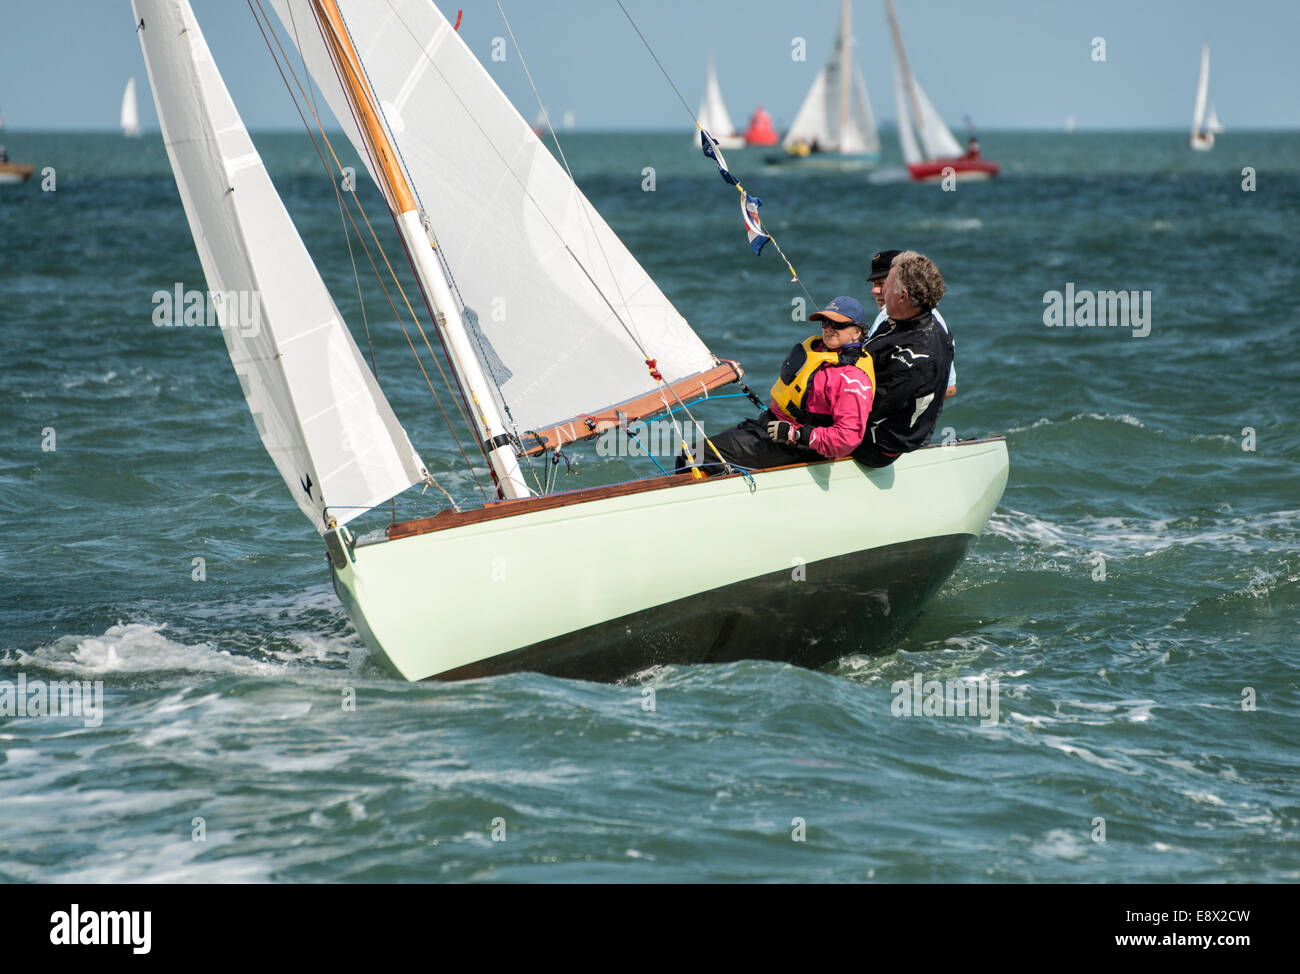 These three sailors are enjoying racing their sailing dinghy in the Solent during the Cowes week regatta. Stock Photo